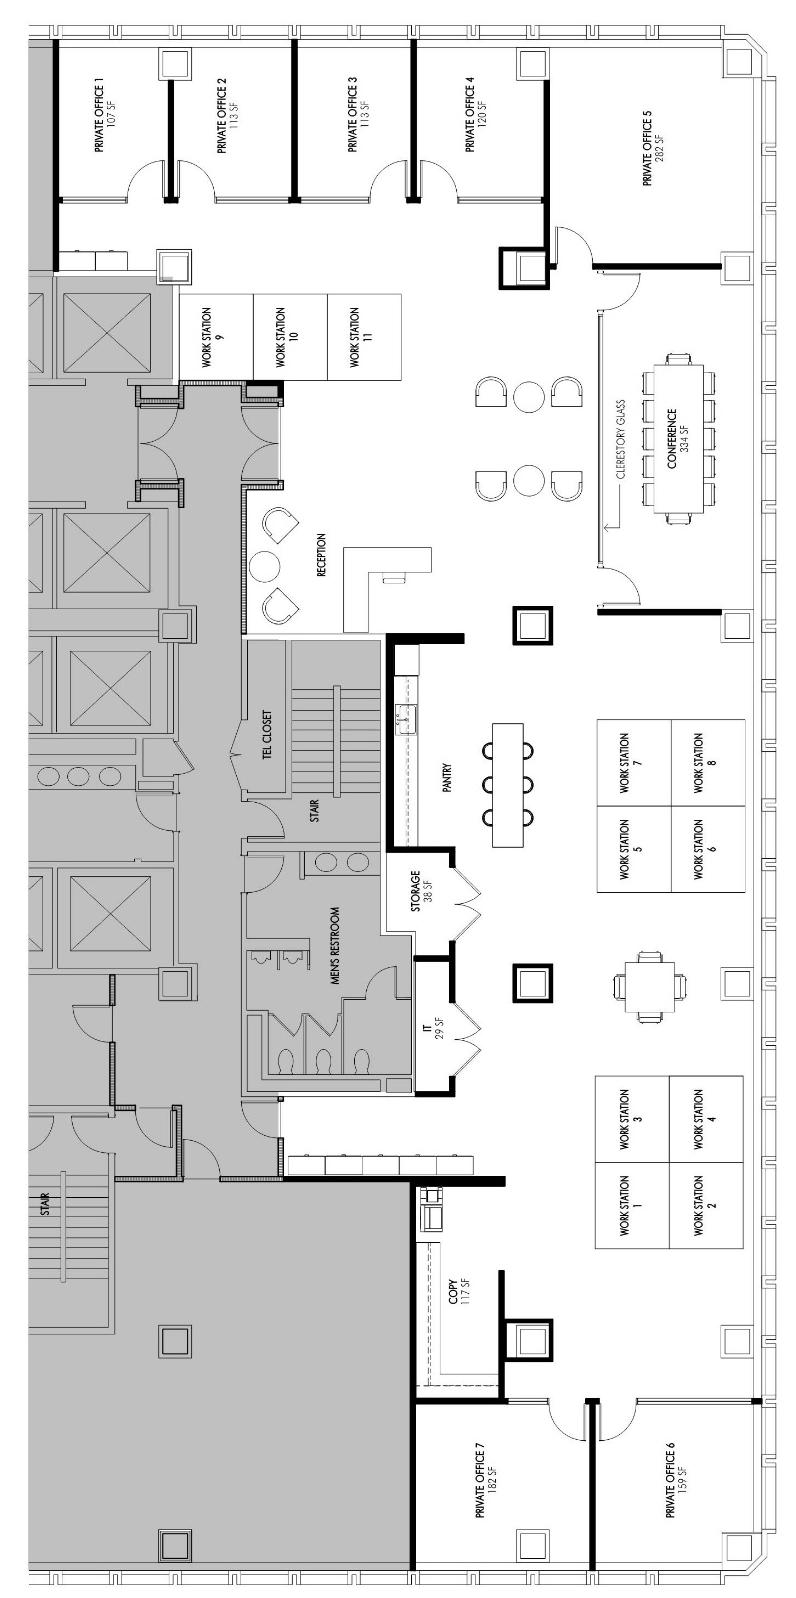 Clay Street Montgomery Street 15 th Partial Floor Plan Suite 1550: 5,916 RSF 7 Private Offices, 2